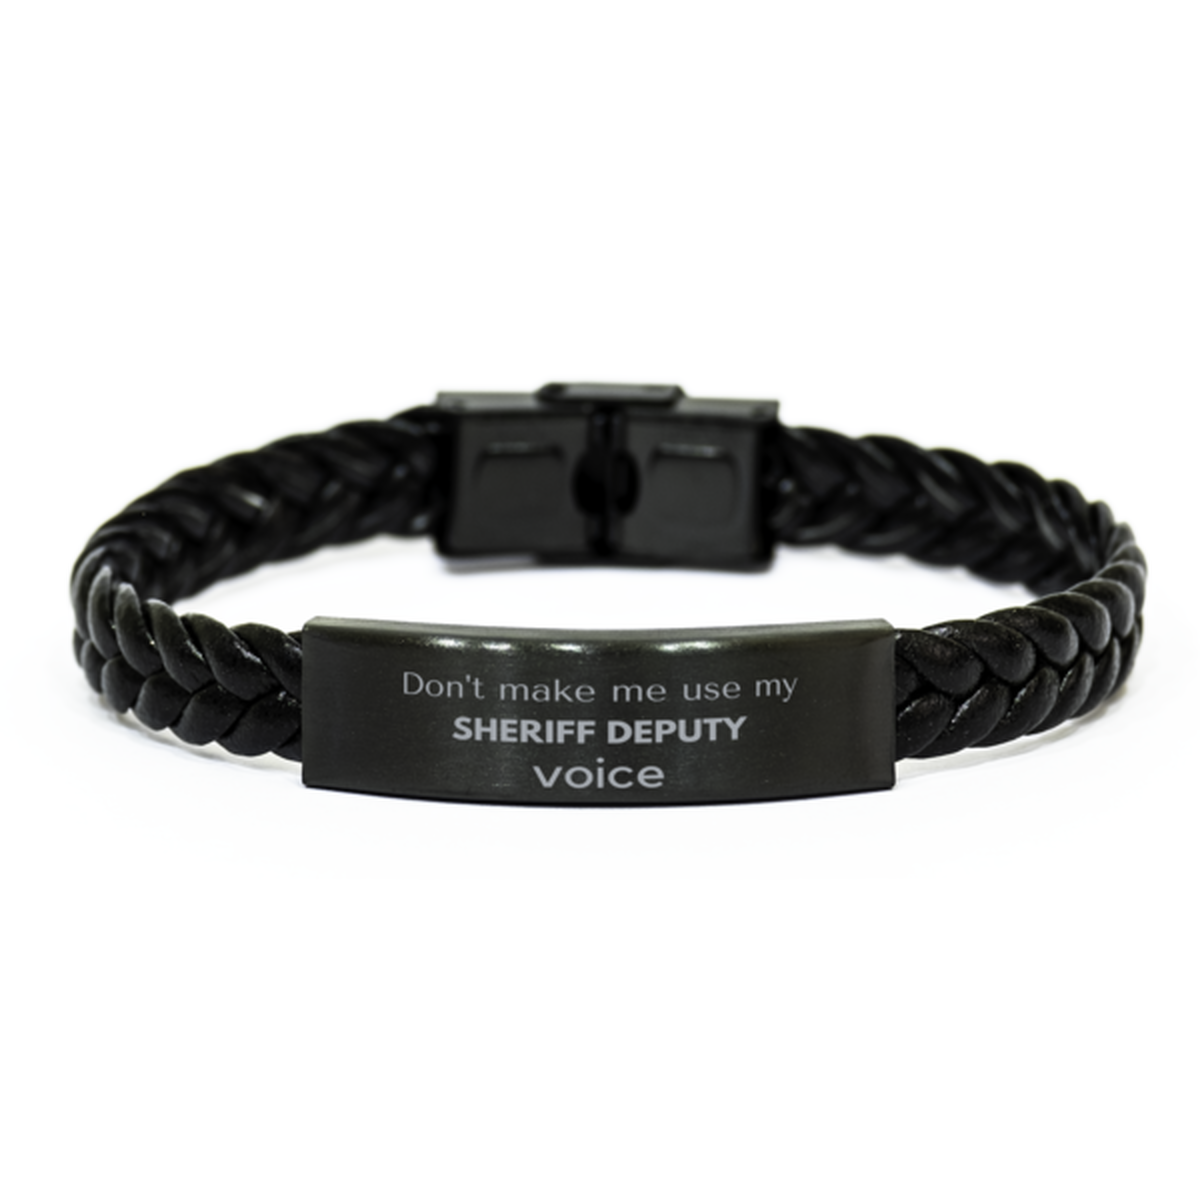 Don't make me use my Sheriff Deputy voice, Sarcasm Sheriff Deputy Gifts, Christmas Sheriff Deputy Braided Leather Bracelet Birthday Unique Gifts For Sheriff Deputy Coworkers, Men, Women, Colleague, Friends